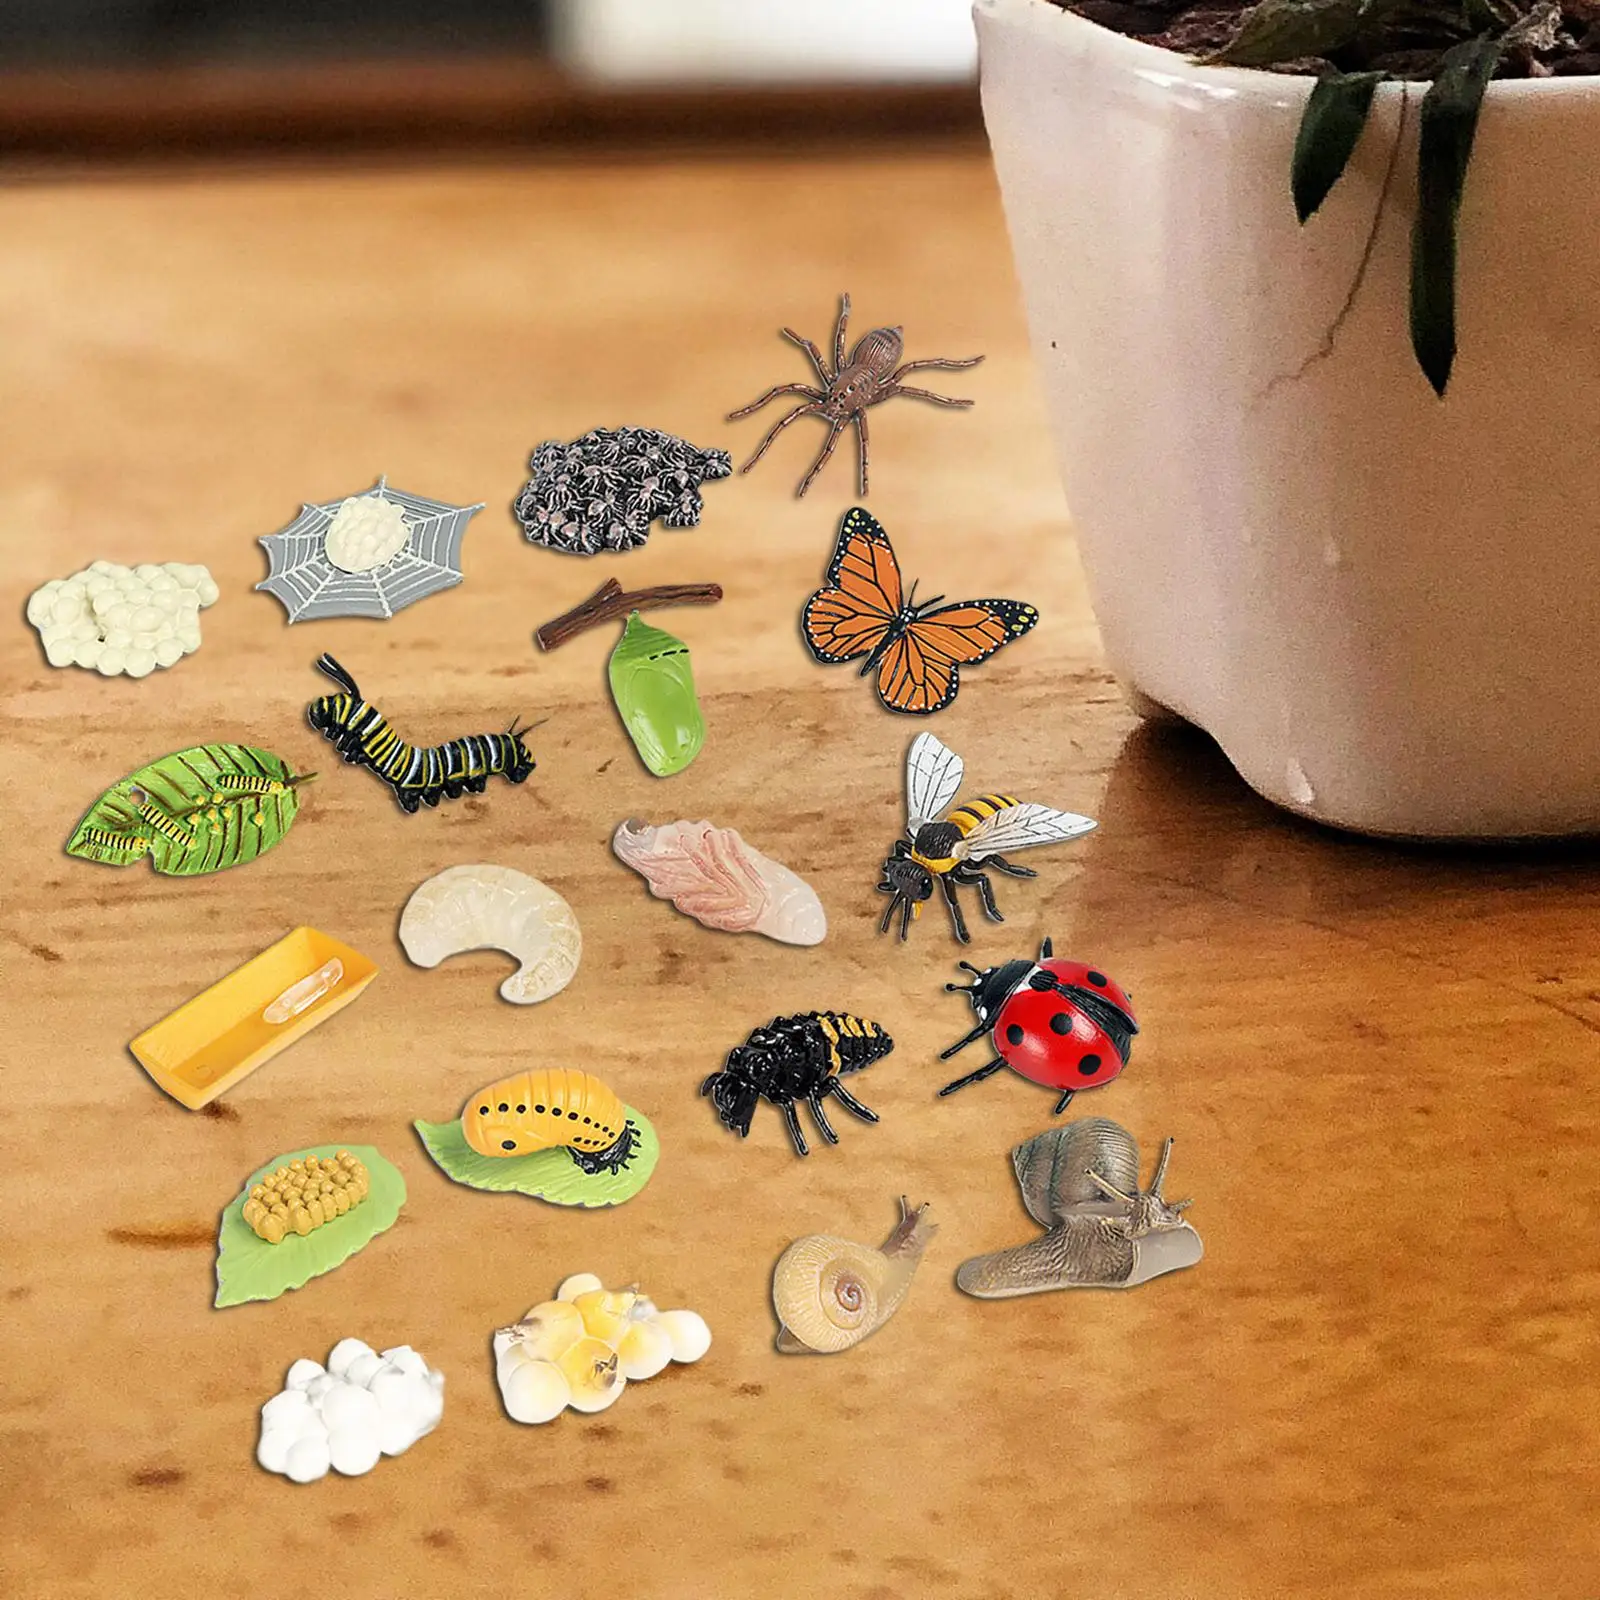 Insect Growth Cycle Set Model Kit Party Favors Science Cognition Teaching Tools Lifelike for Students Kids Preschool Toddlers